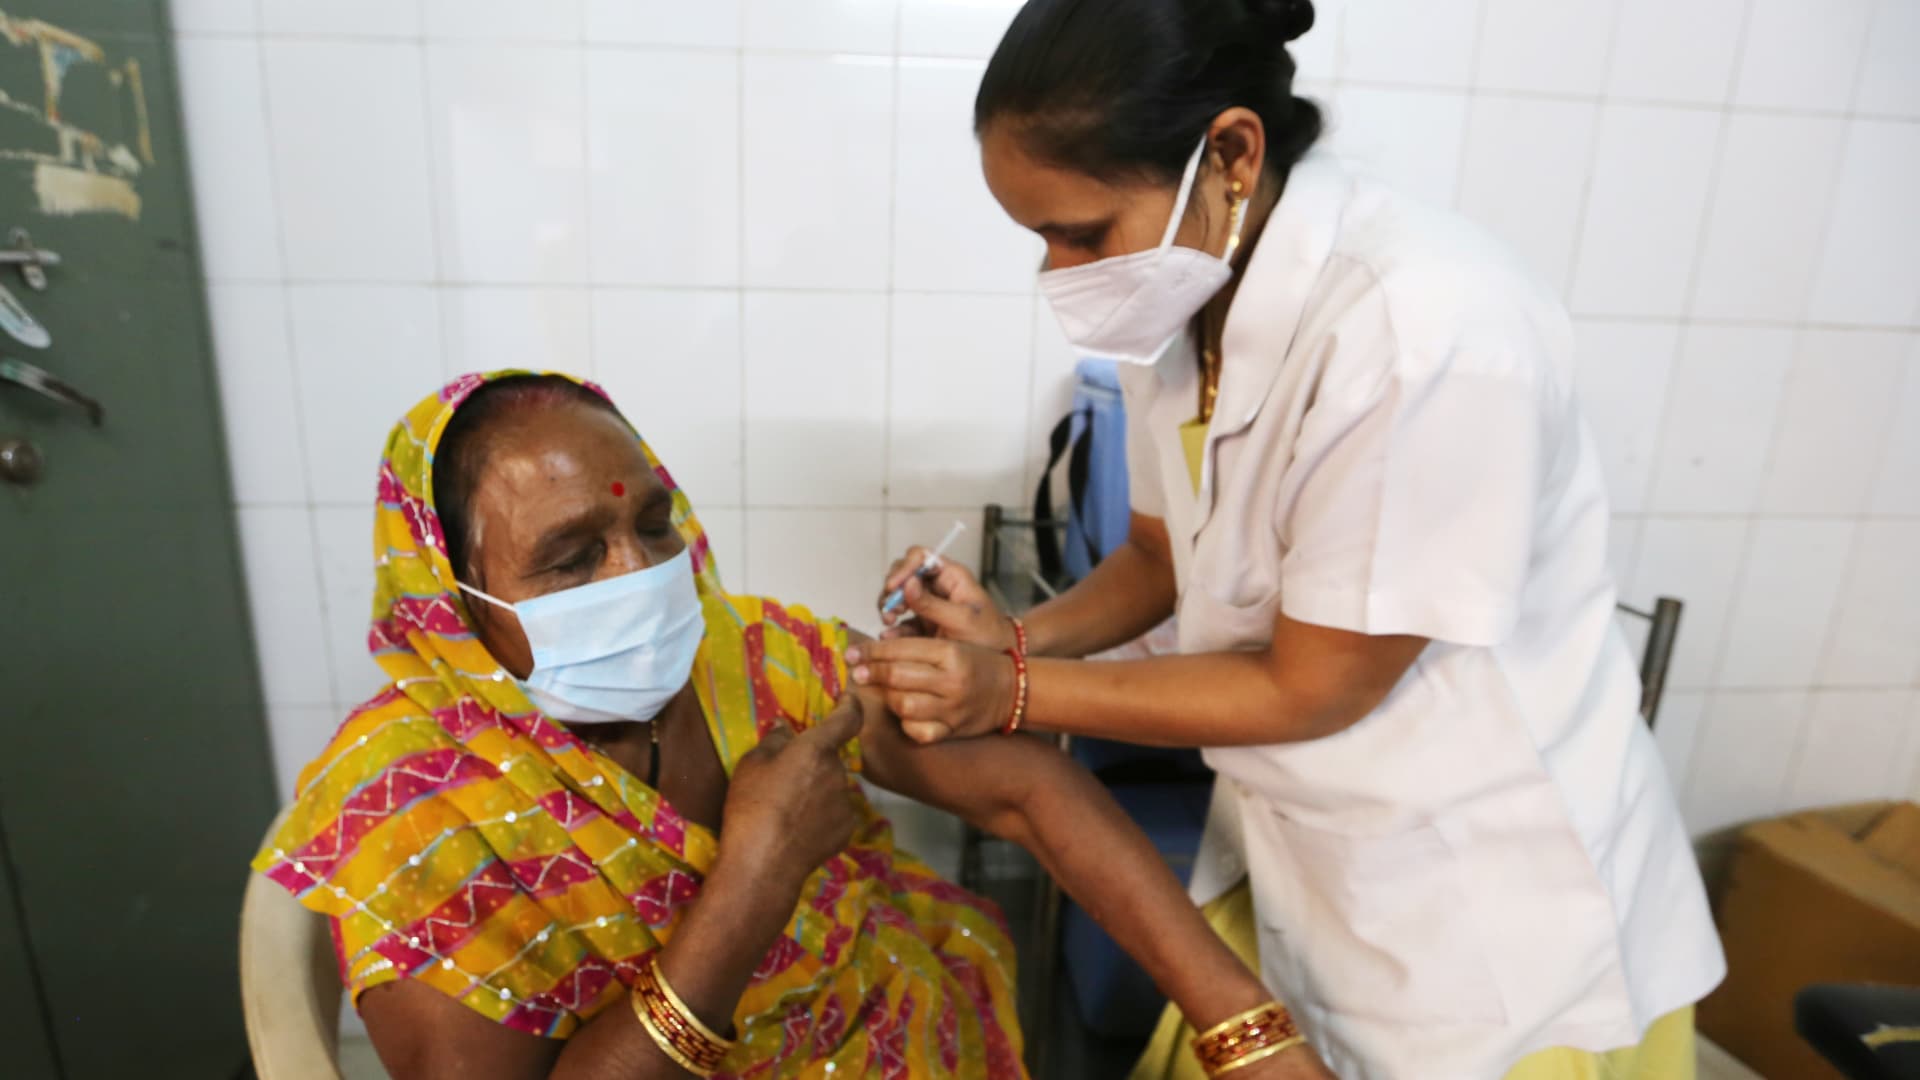 A health worker administers a dose of COVID-19 vaccine at a clinic in Bhopal, India, March 25, 2021.